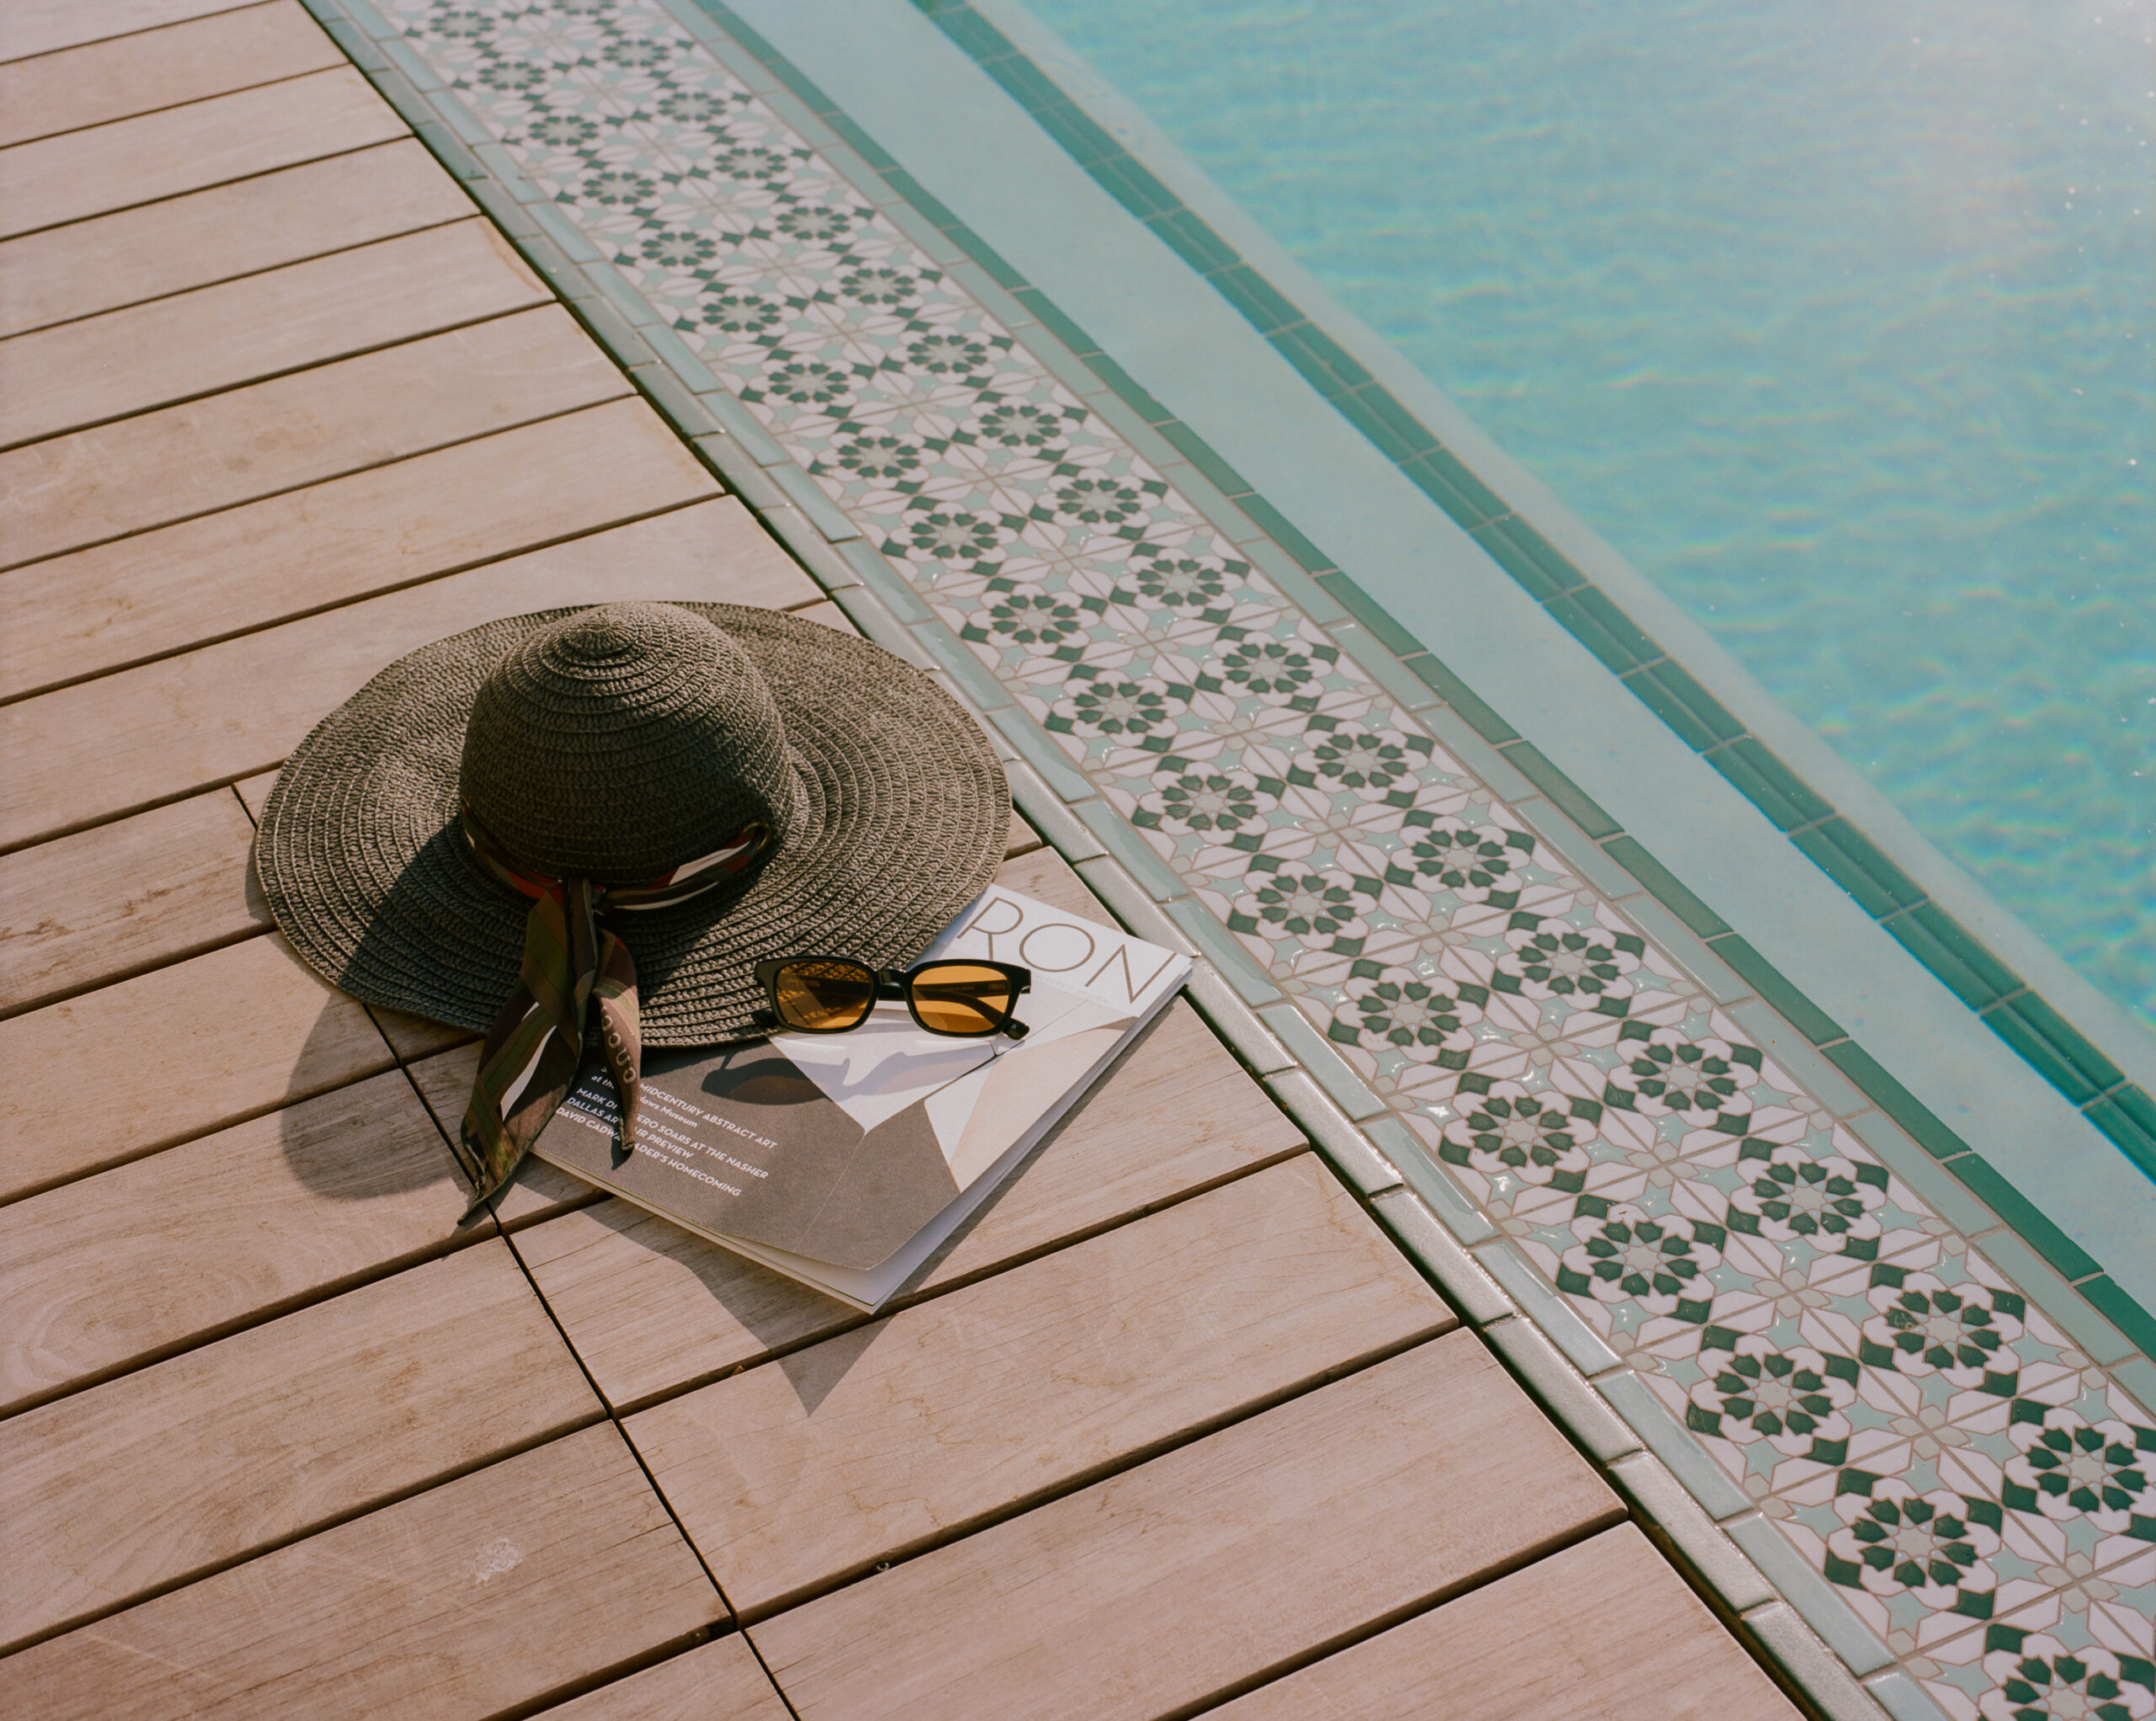 Hat and notebook by the Hotel Swexan pool